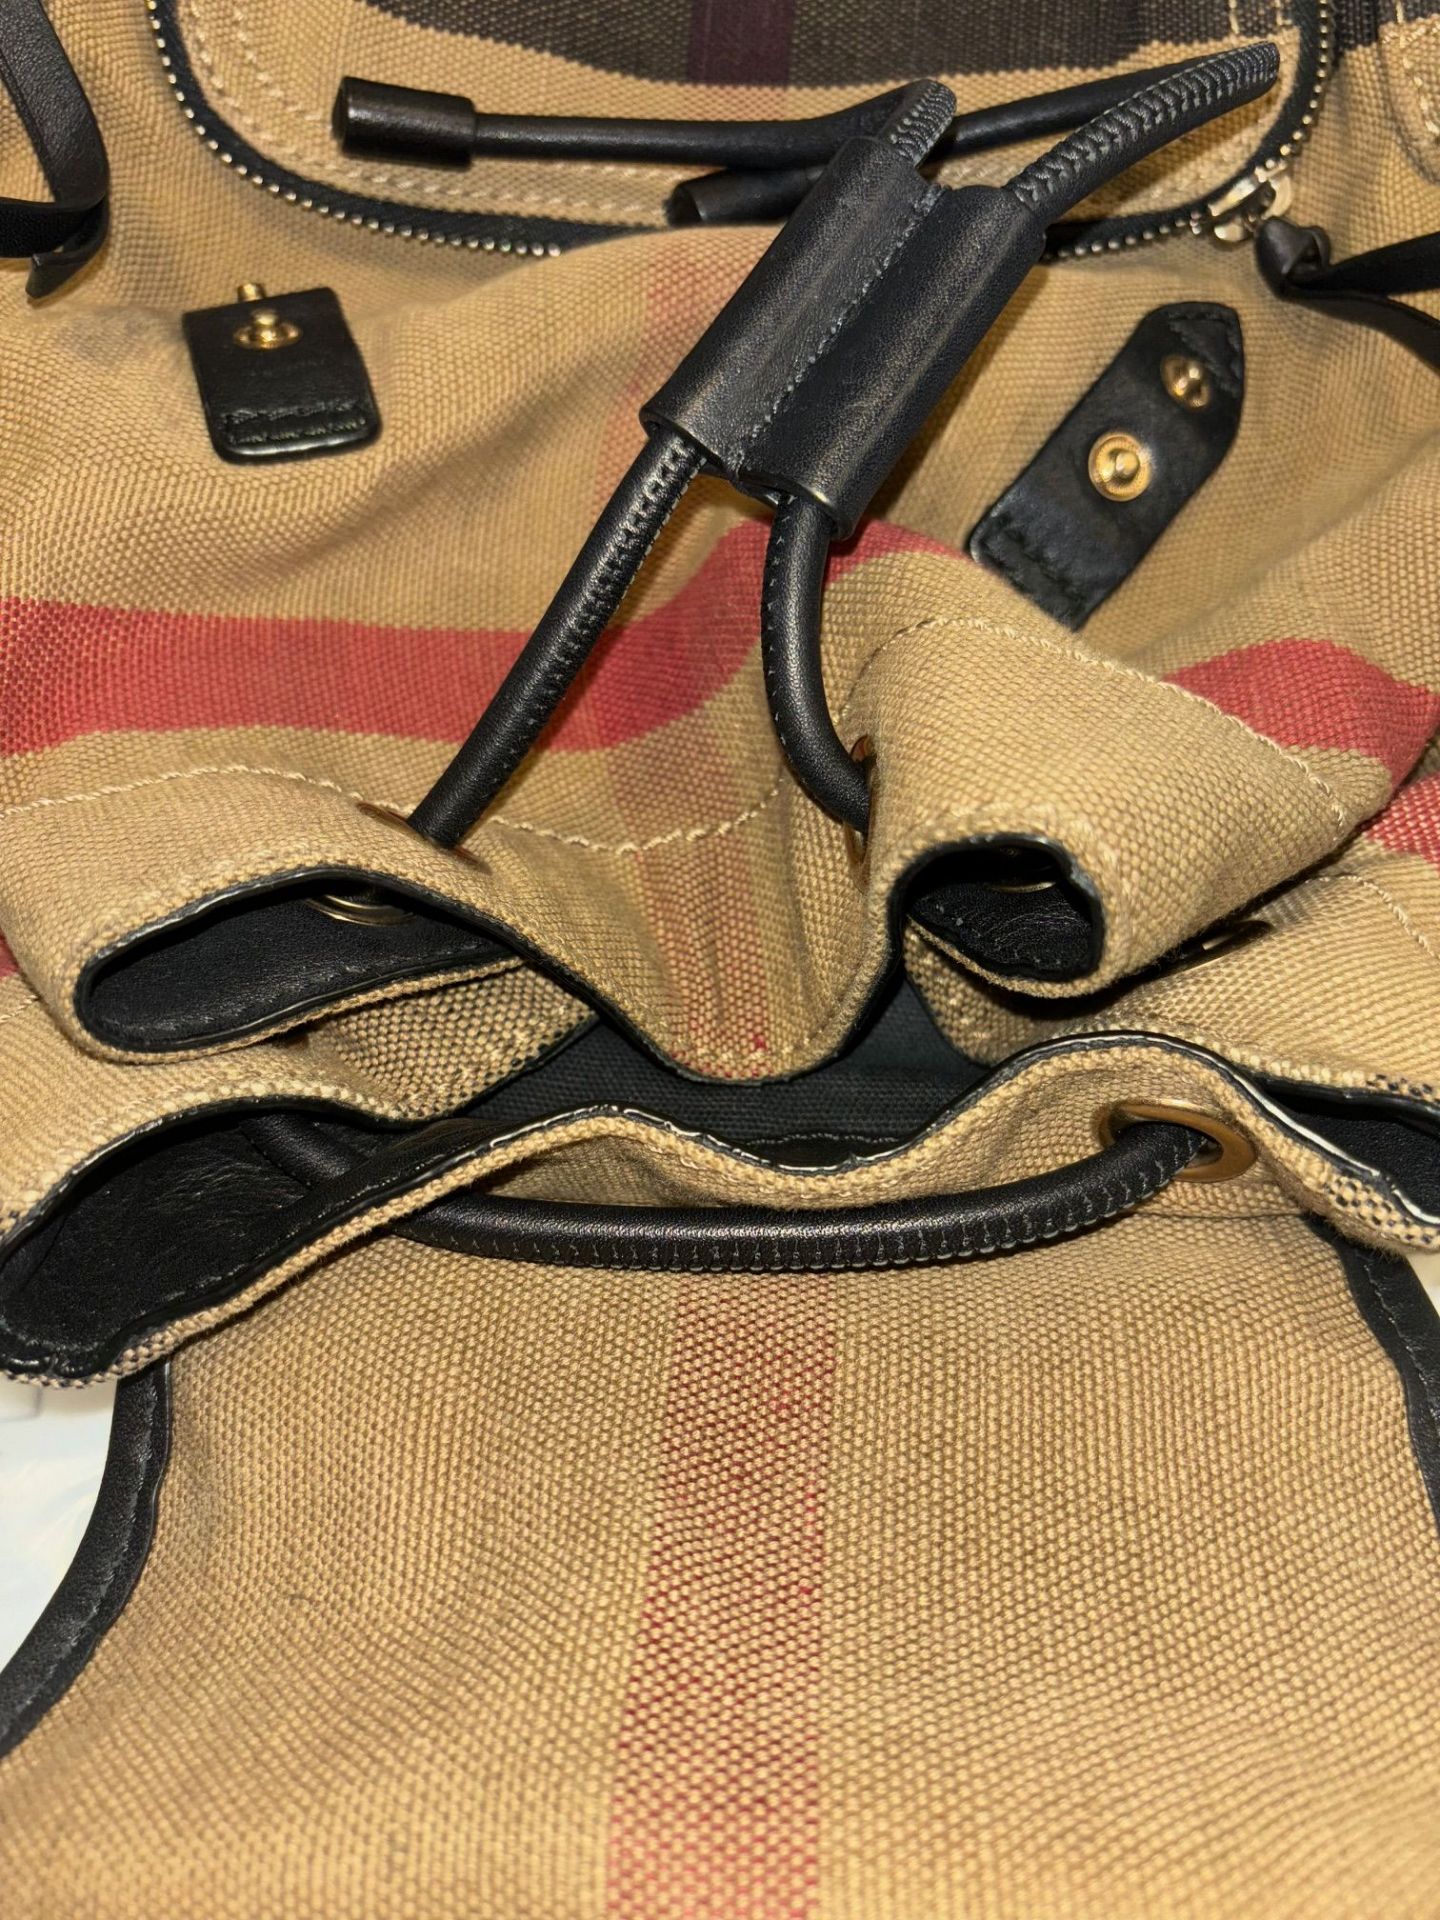 Genuine Burberry Canvas Backpack. RRP £895.00. WITH TAGS - Image 11 of 12